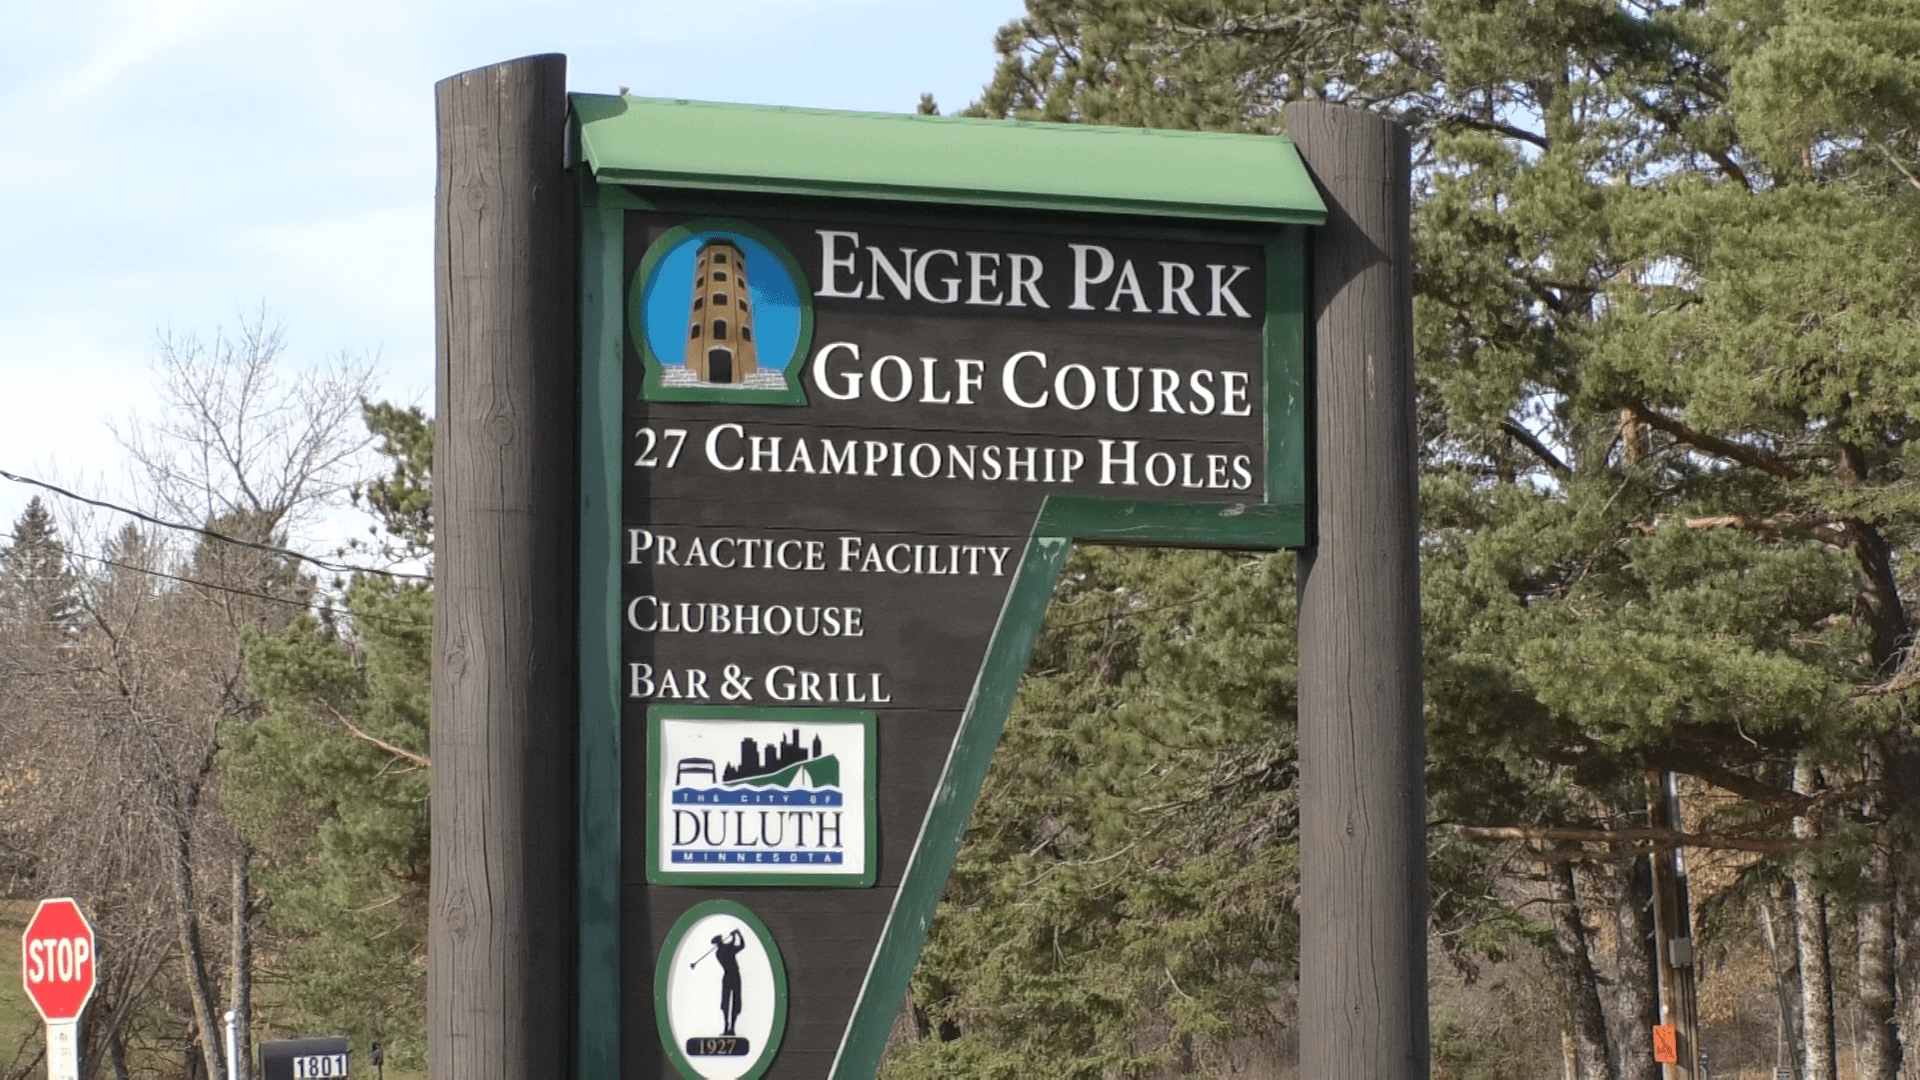 A picture of the Enger Park Golf Course